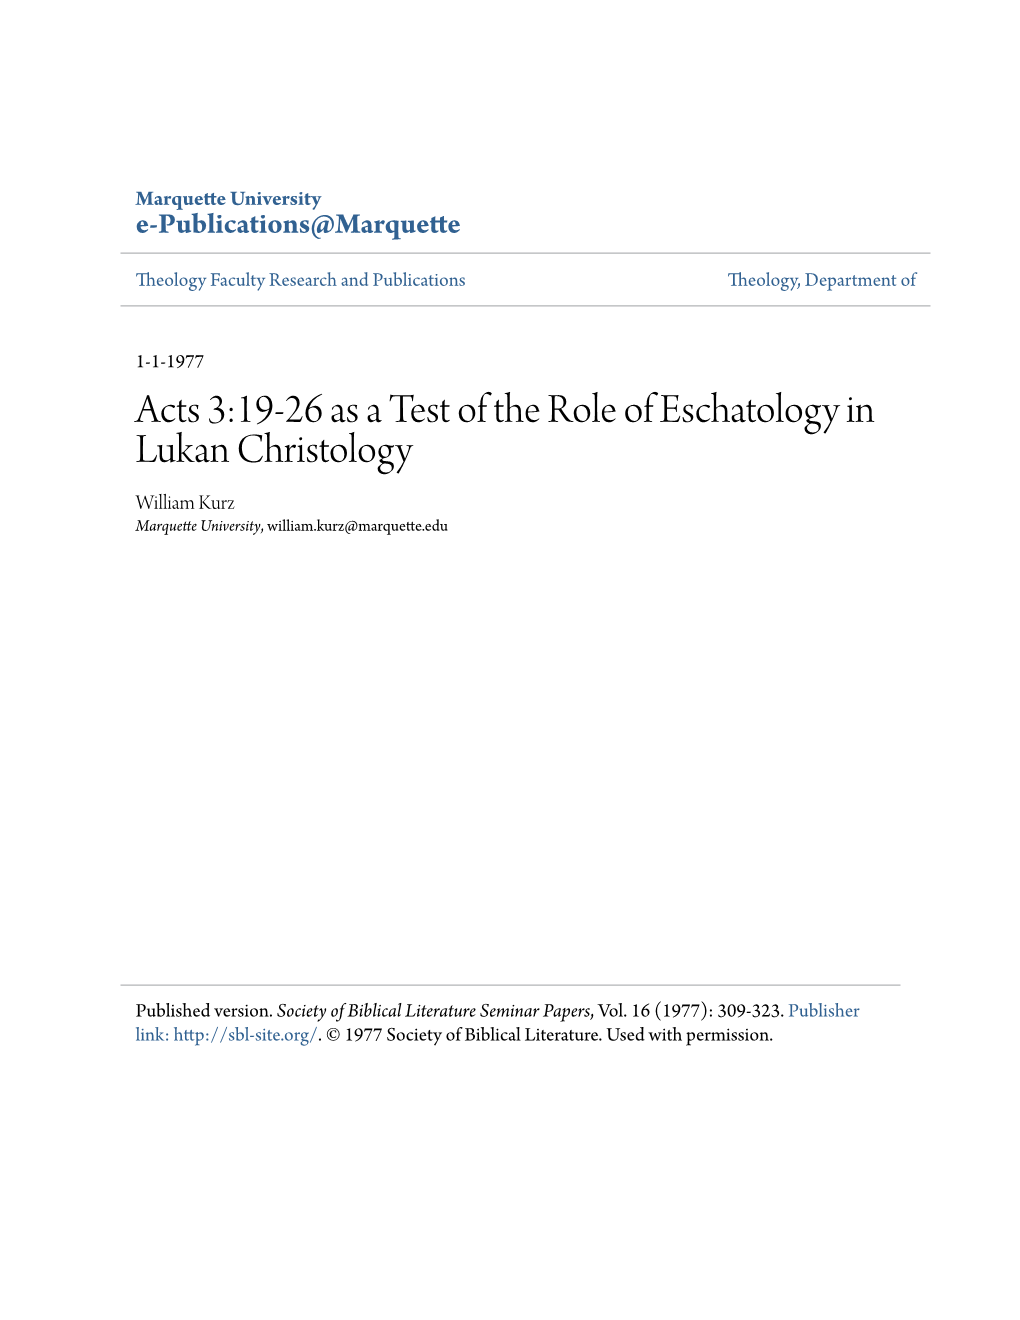 Acts 3:19-26 As a Test of the Role of Eschatology in Lukan Christology William Kurz Marquette University, William.Kurz@Marquette.Edu